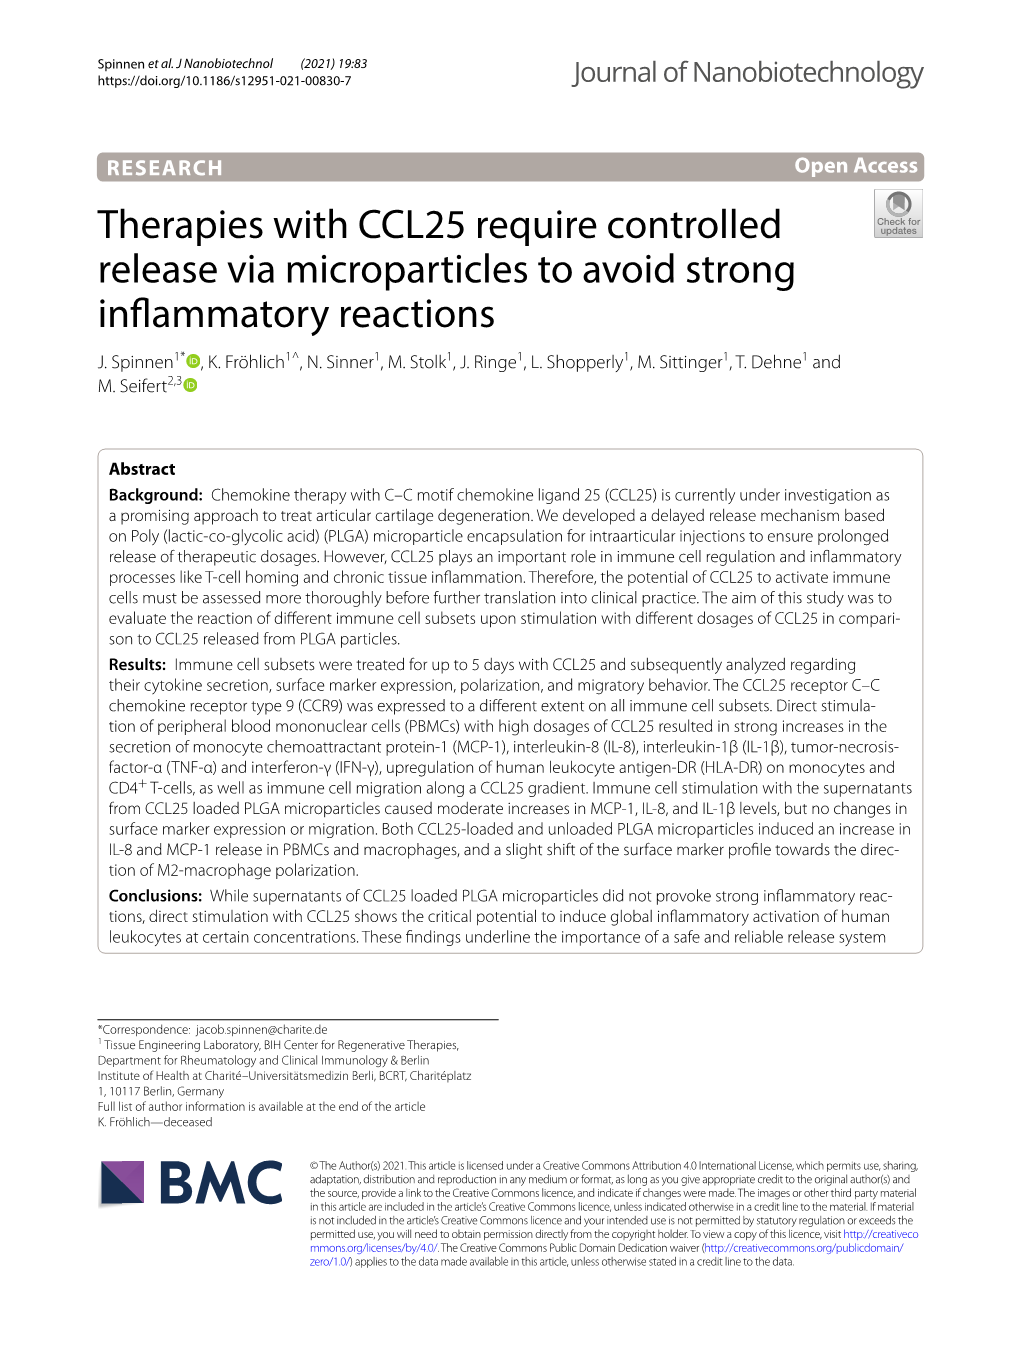 Therapies with CCL25 Require Controlled Release Via Microparticles to Avoid Strong Infammatory Reactions J